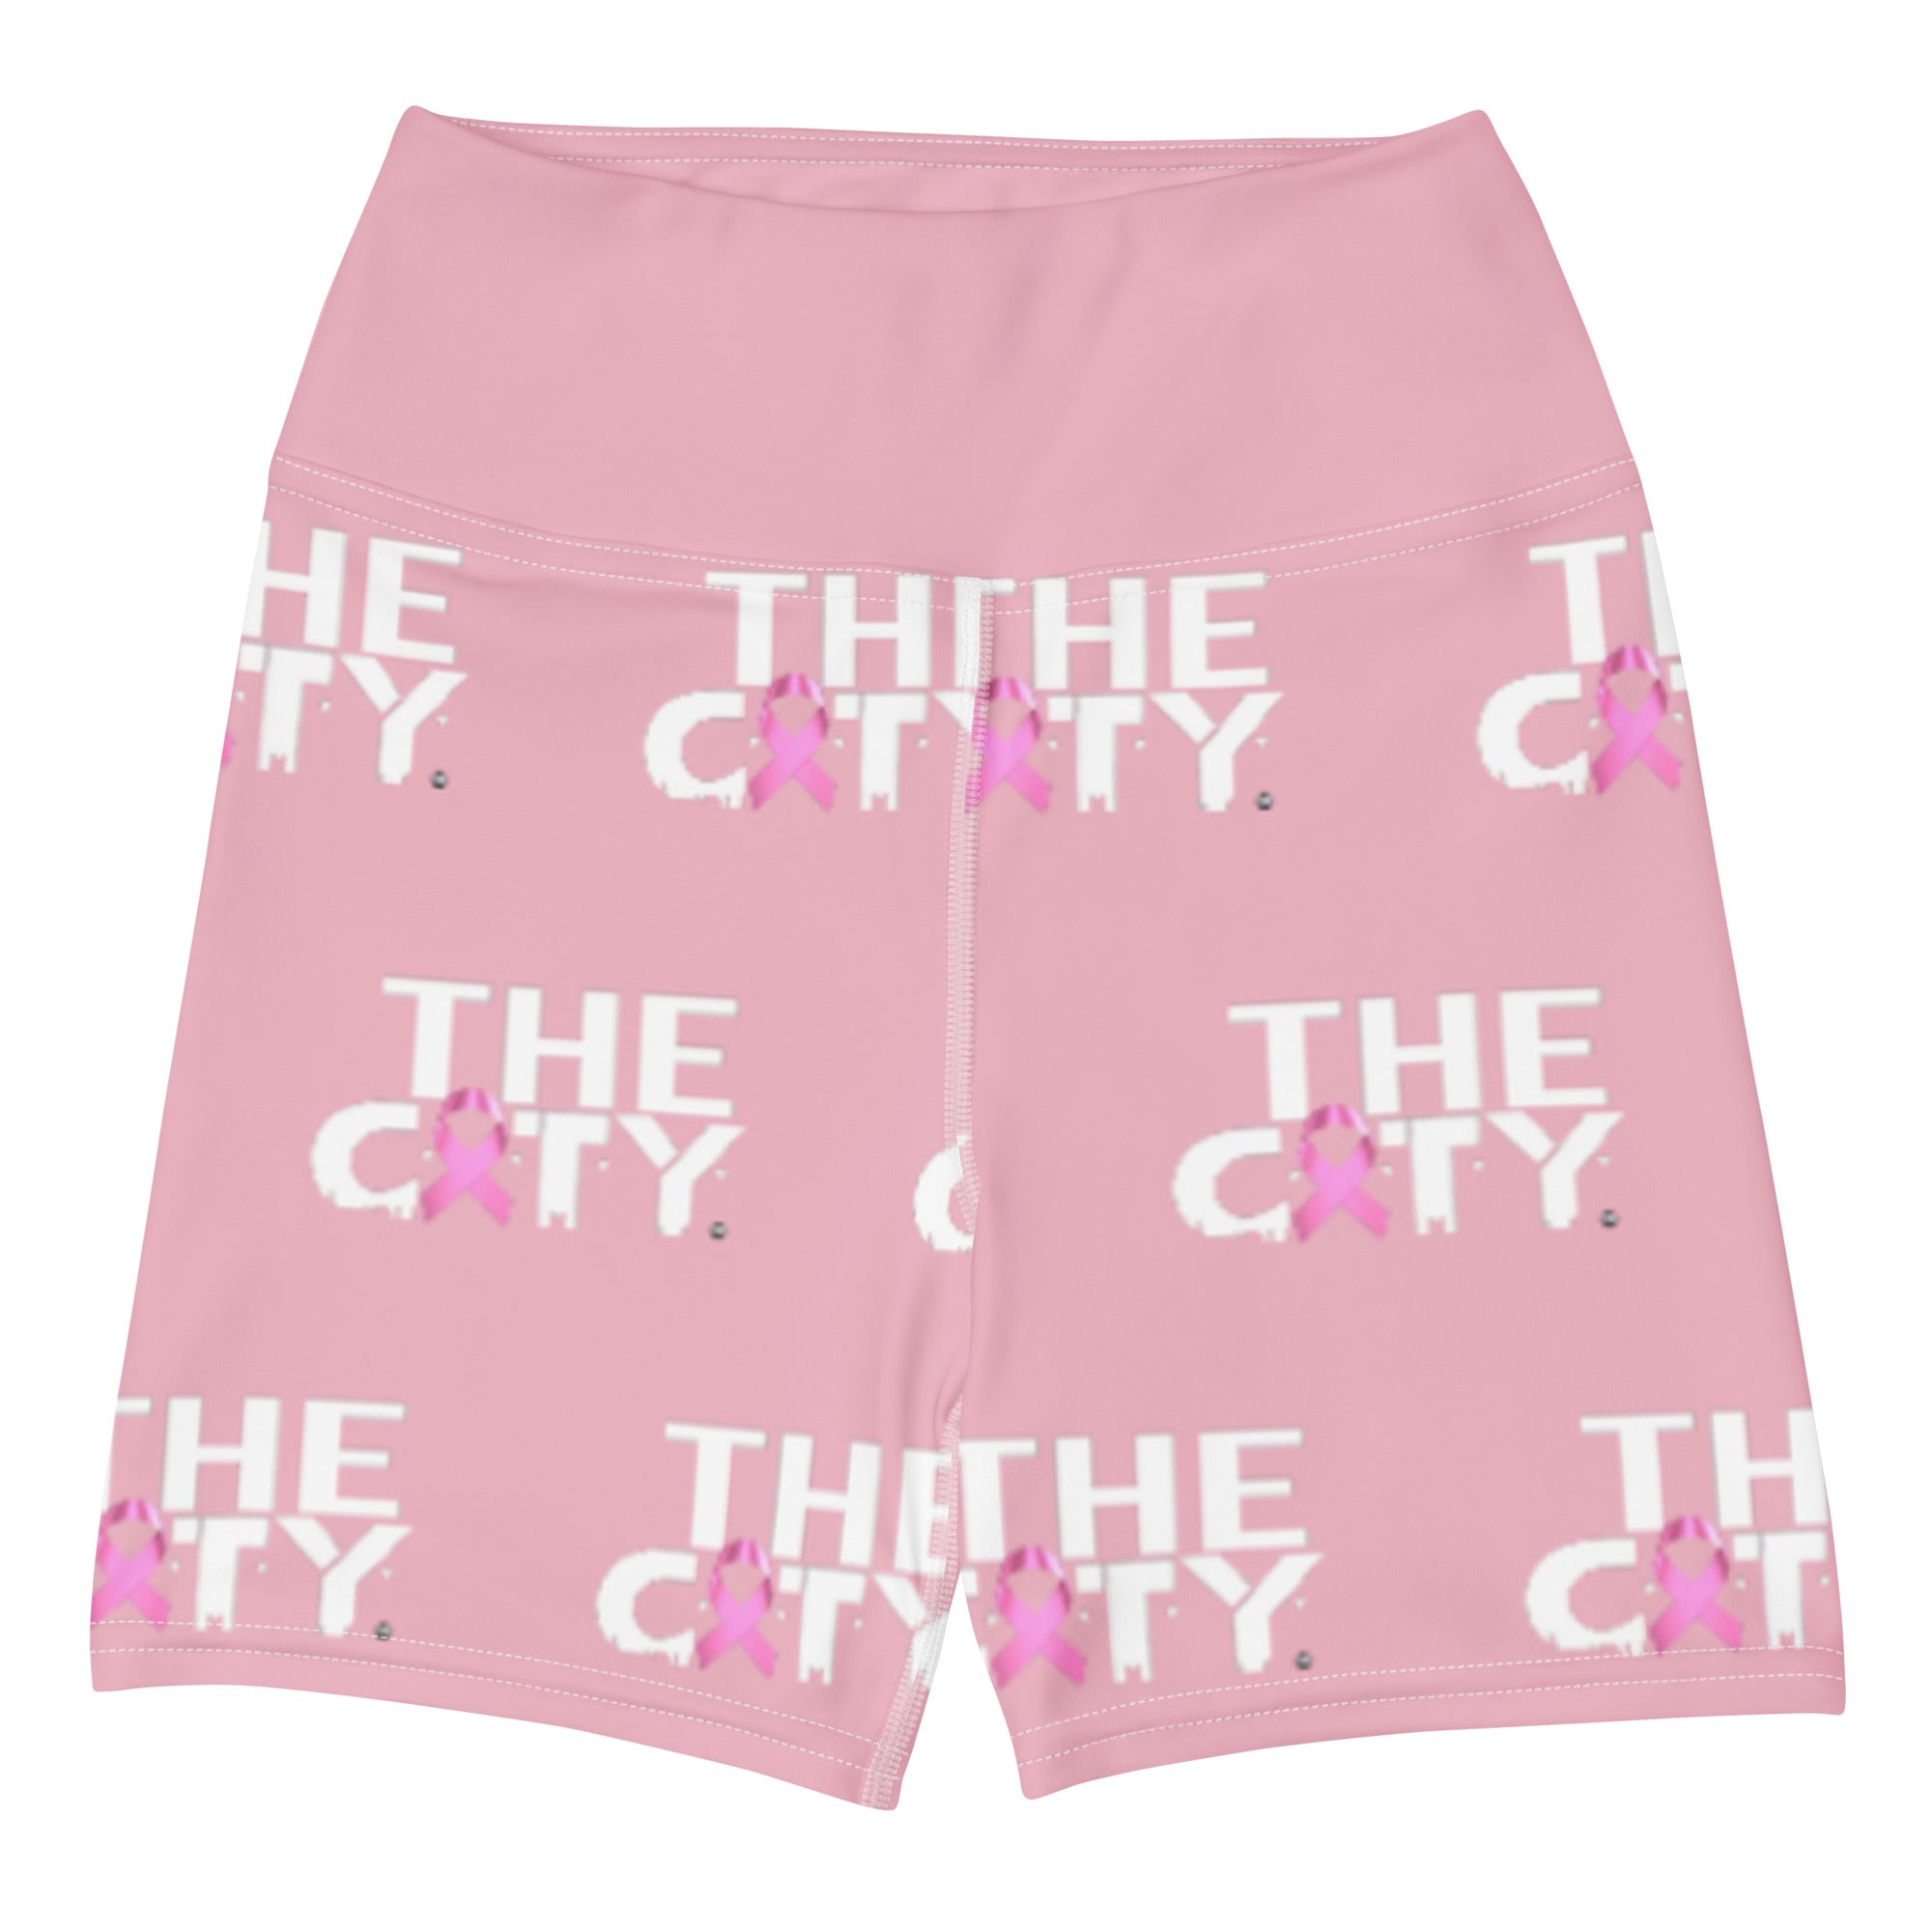 THE C.I.T.Y. Breast Cancer Awareness PNK Yoga Shorts